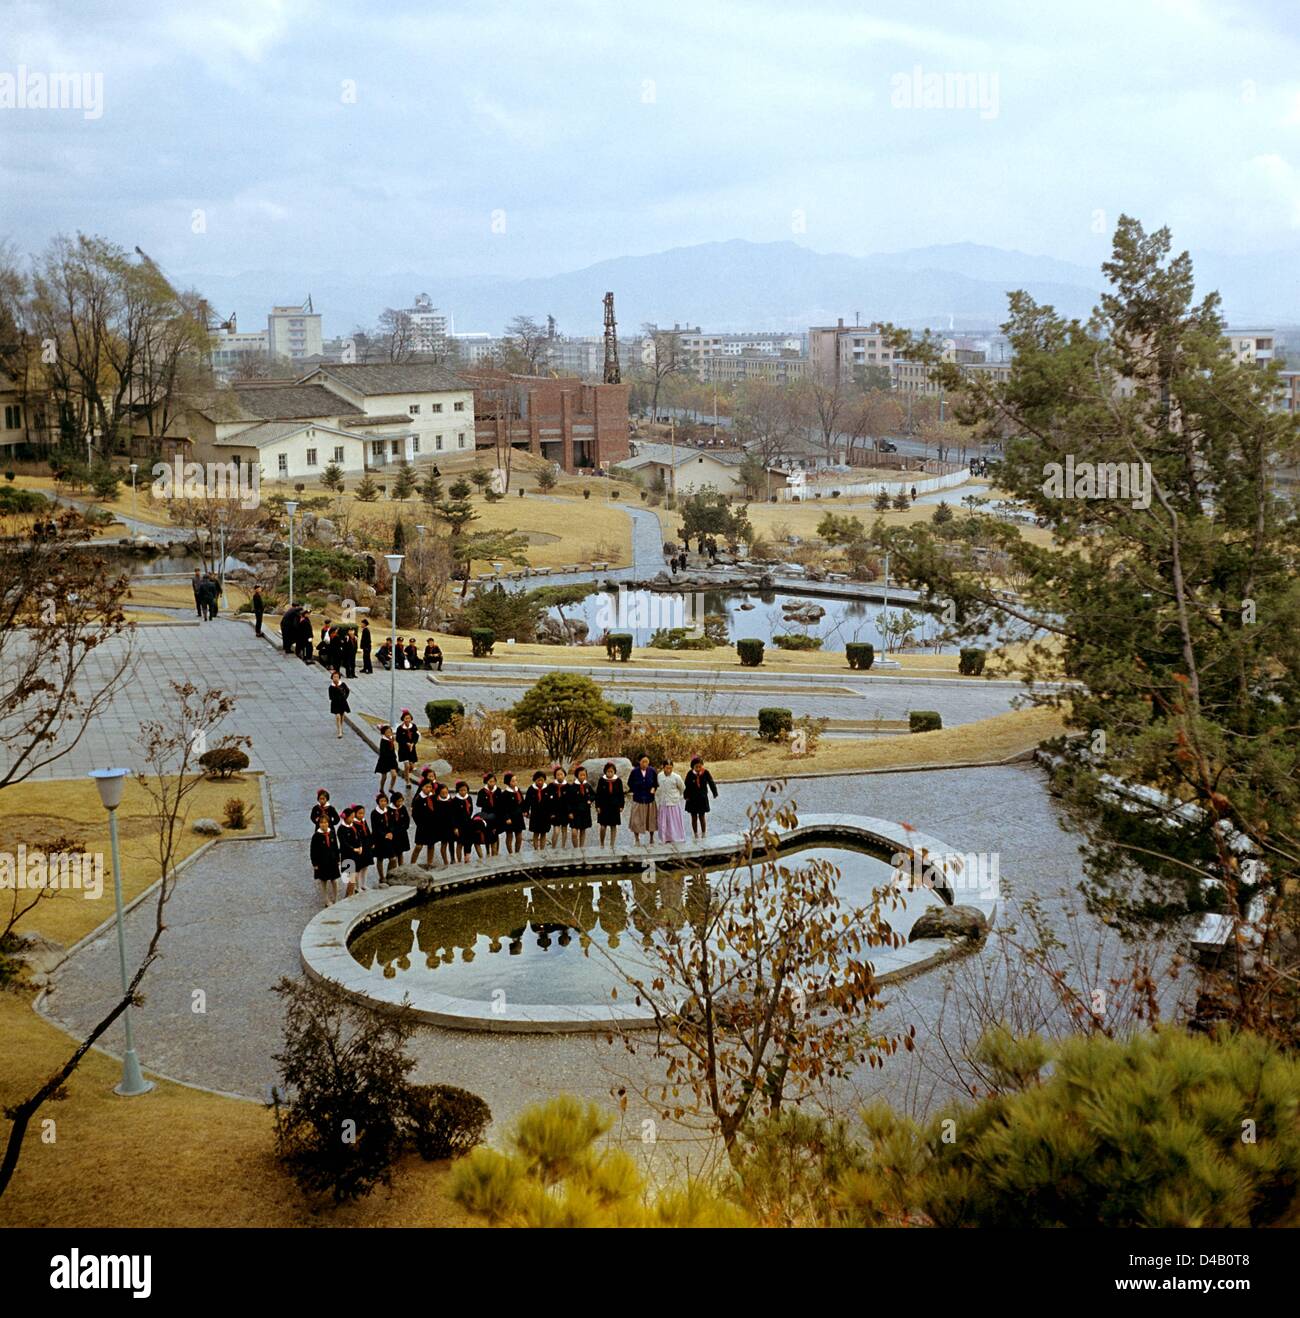 Girls in uniform with red scarves stand in a park at a water basin near Wilhelm-Pieck Street (in the background) in the harbour city of Hamhung  in the Korean Democratic People's Republic, photographed on the 6th of November in 1971. Hamhung was destroyed during the Korean War (1950-1953) and was reconstructed as an industrial centre with the decisive help ofthe GDR in the 50s and 60s.    Photo: ddrbildarchiv.de / Klaus Morgenstern - GESPERRT FÜR BILDFUNK Stock Photo